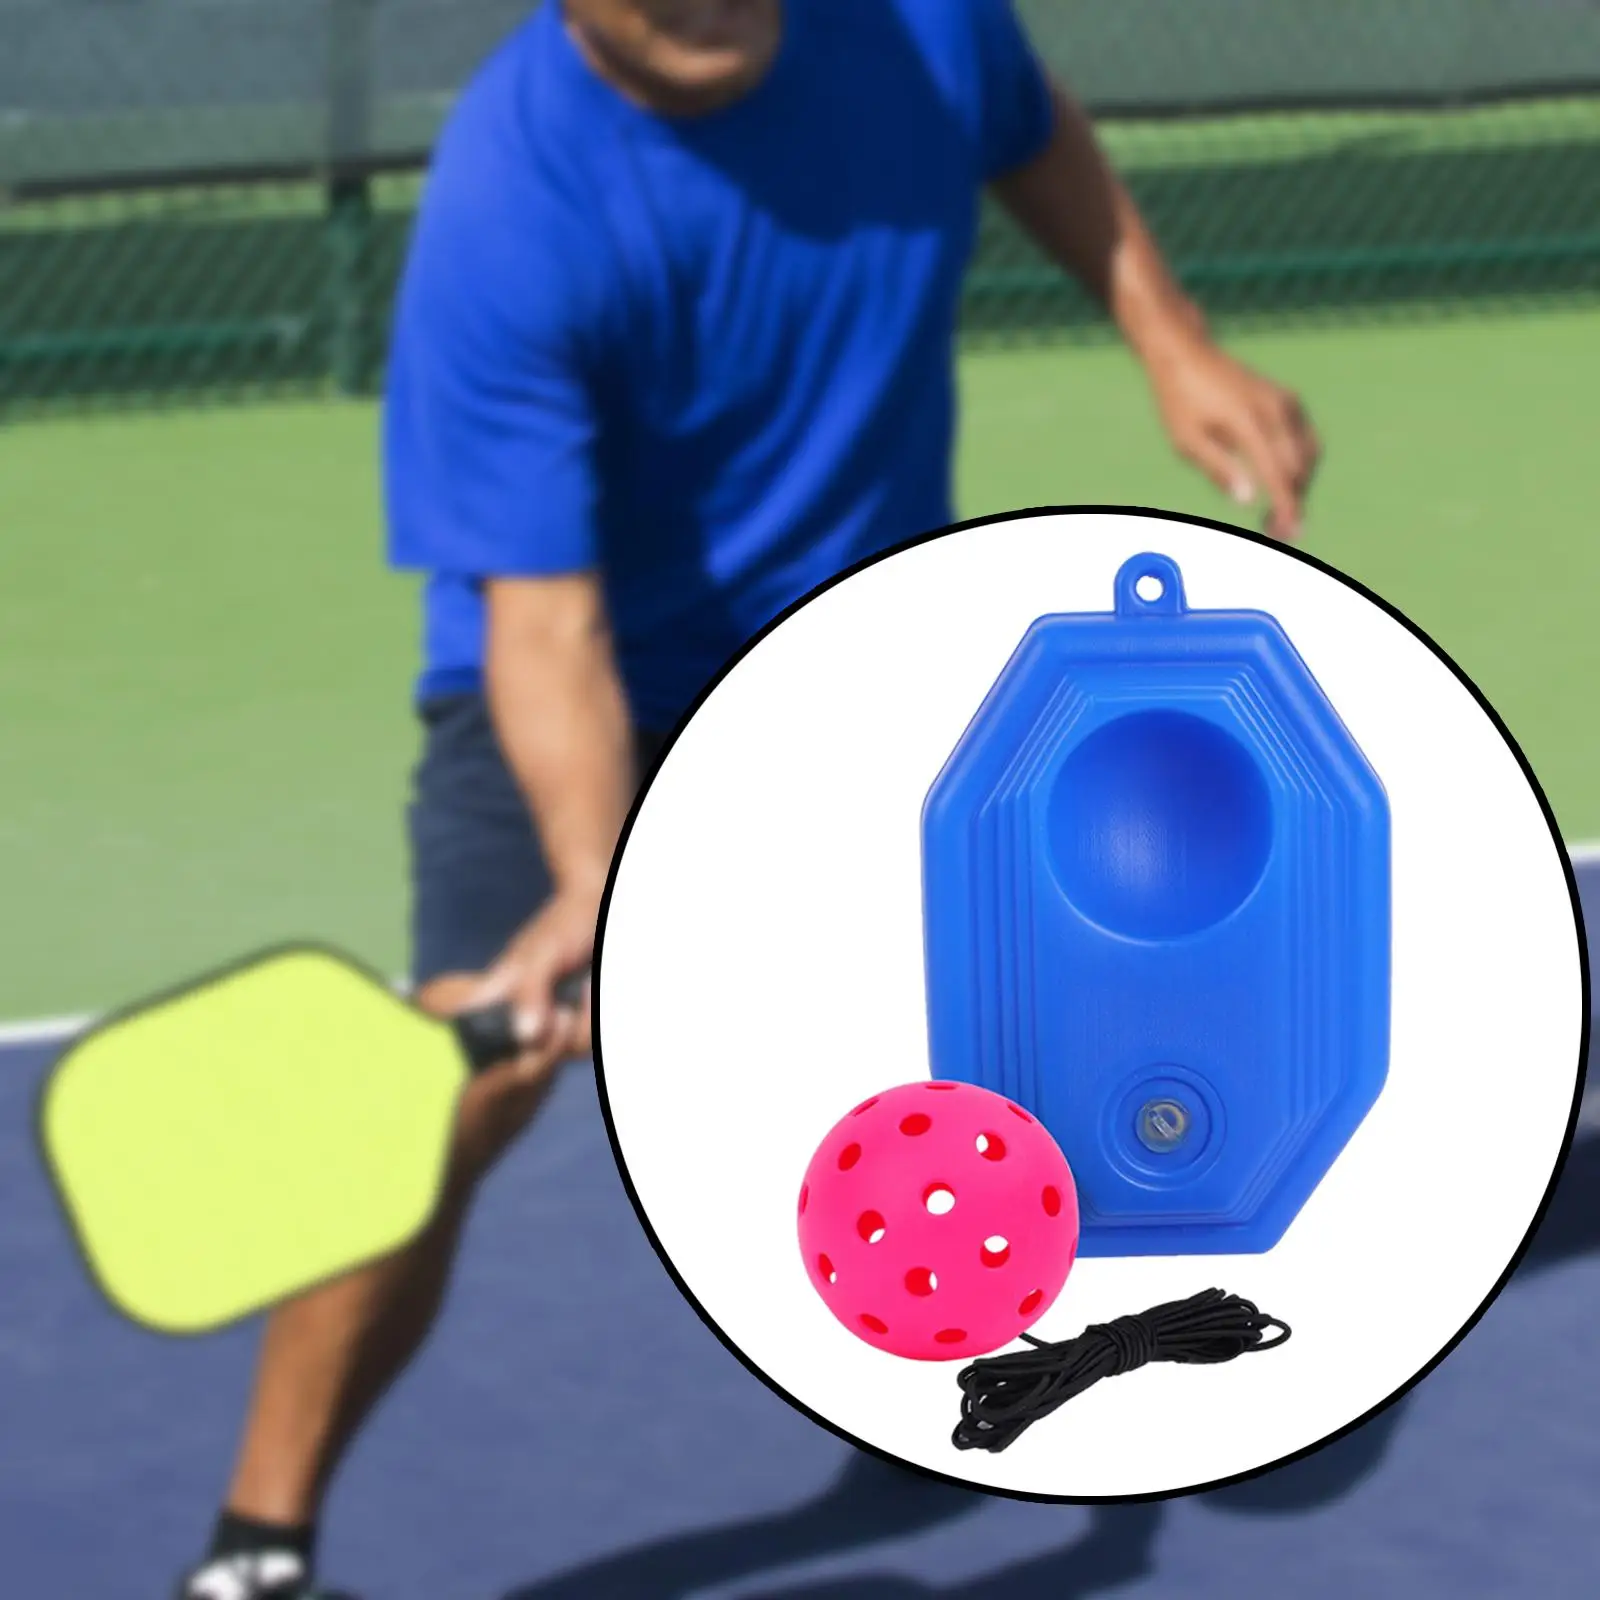 Pickleball Trainer Portable with Pickleball Ball Pickleball Training Equipment Practice exercise tool Kids Adults Beginners